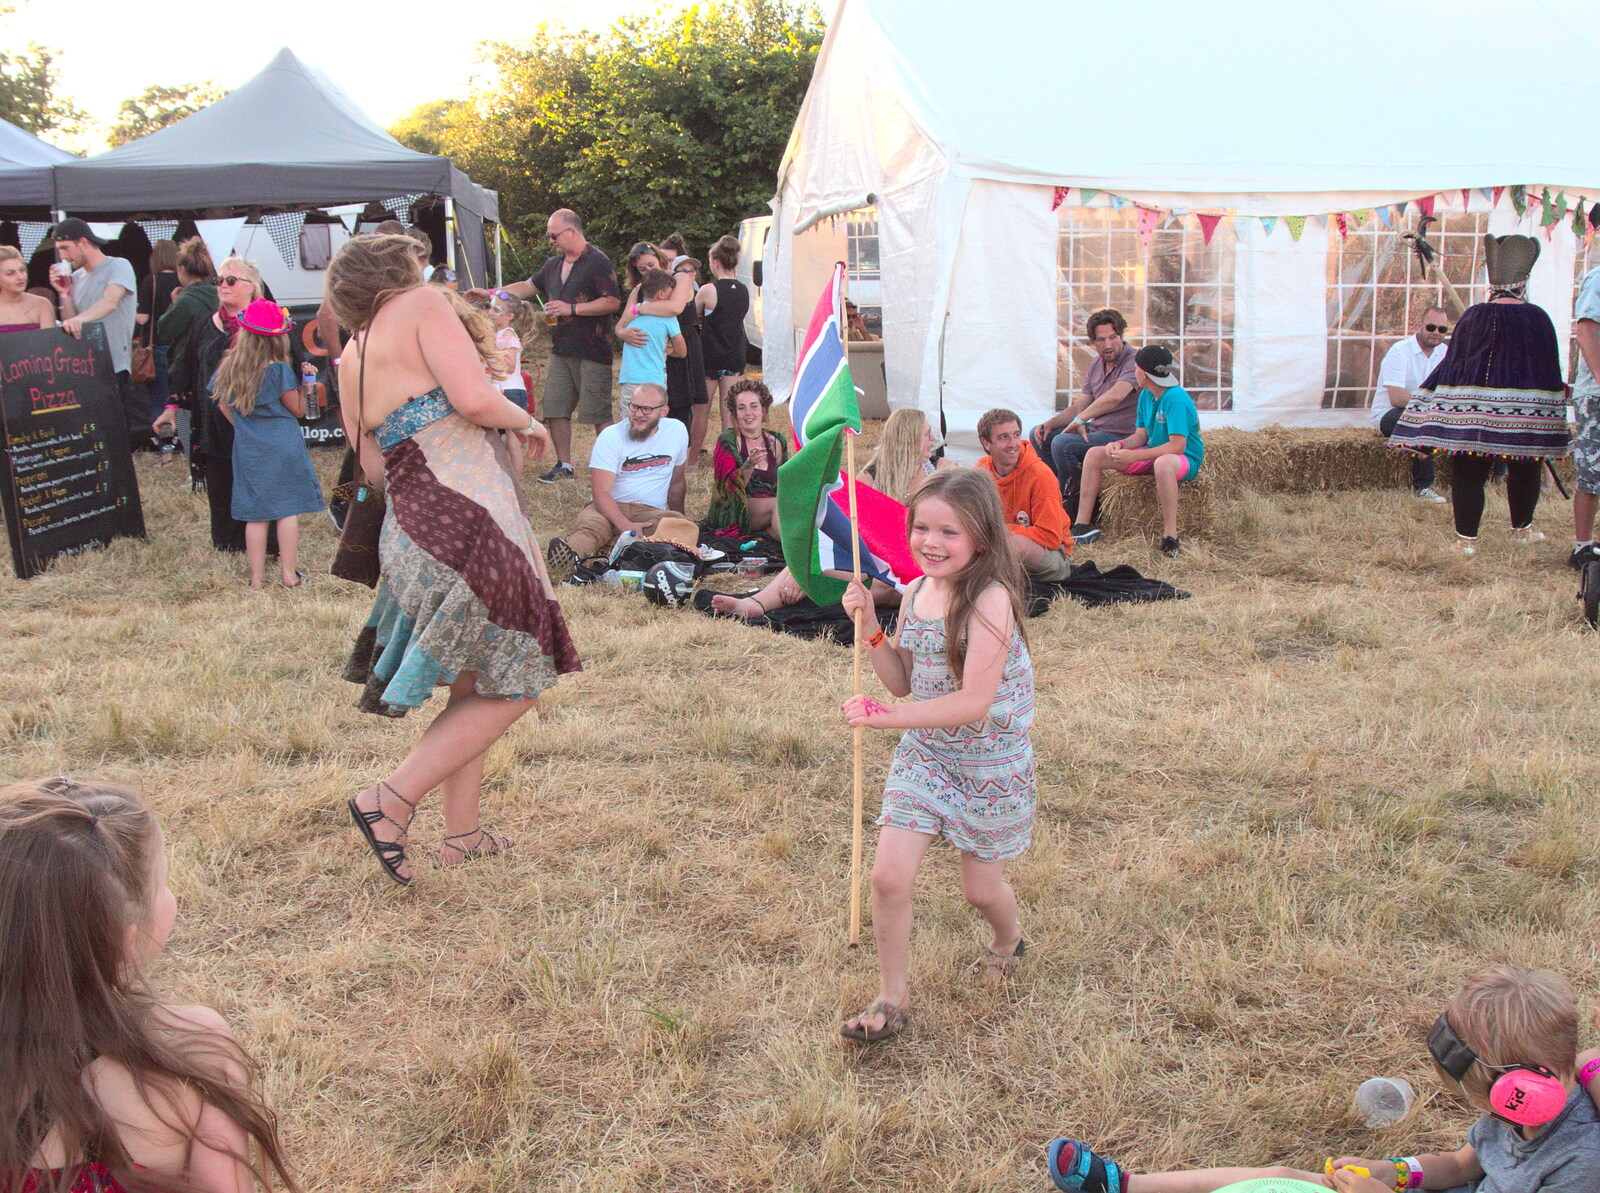 A girl runs off with the flag from WoW Festival, Burston, Norfolk - 29th June - 1st July 2018